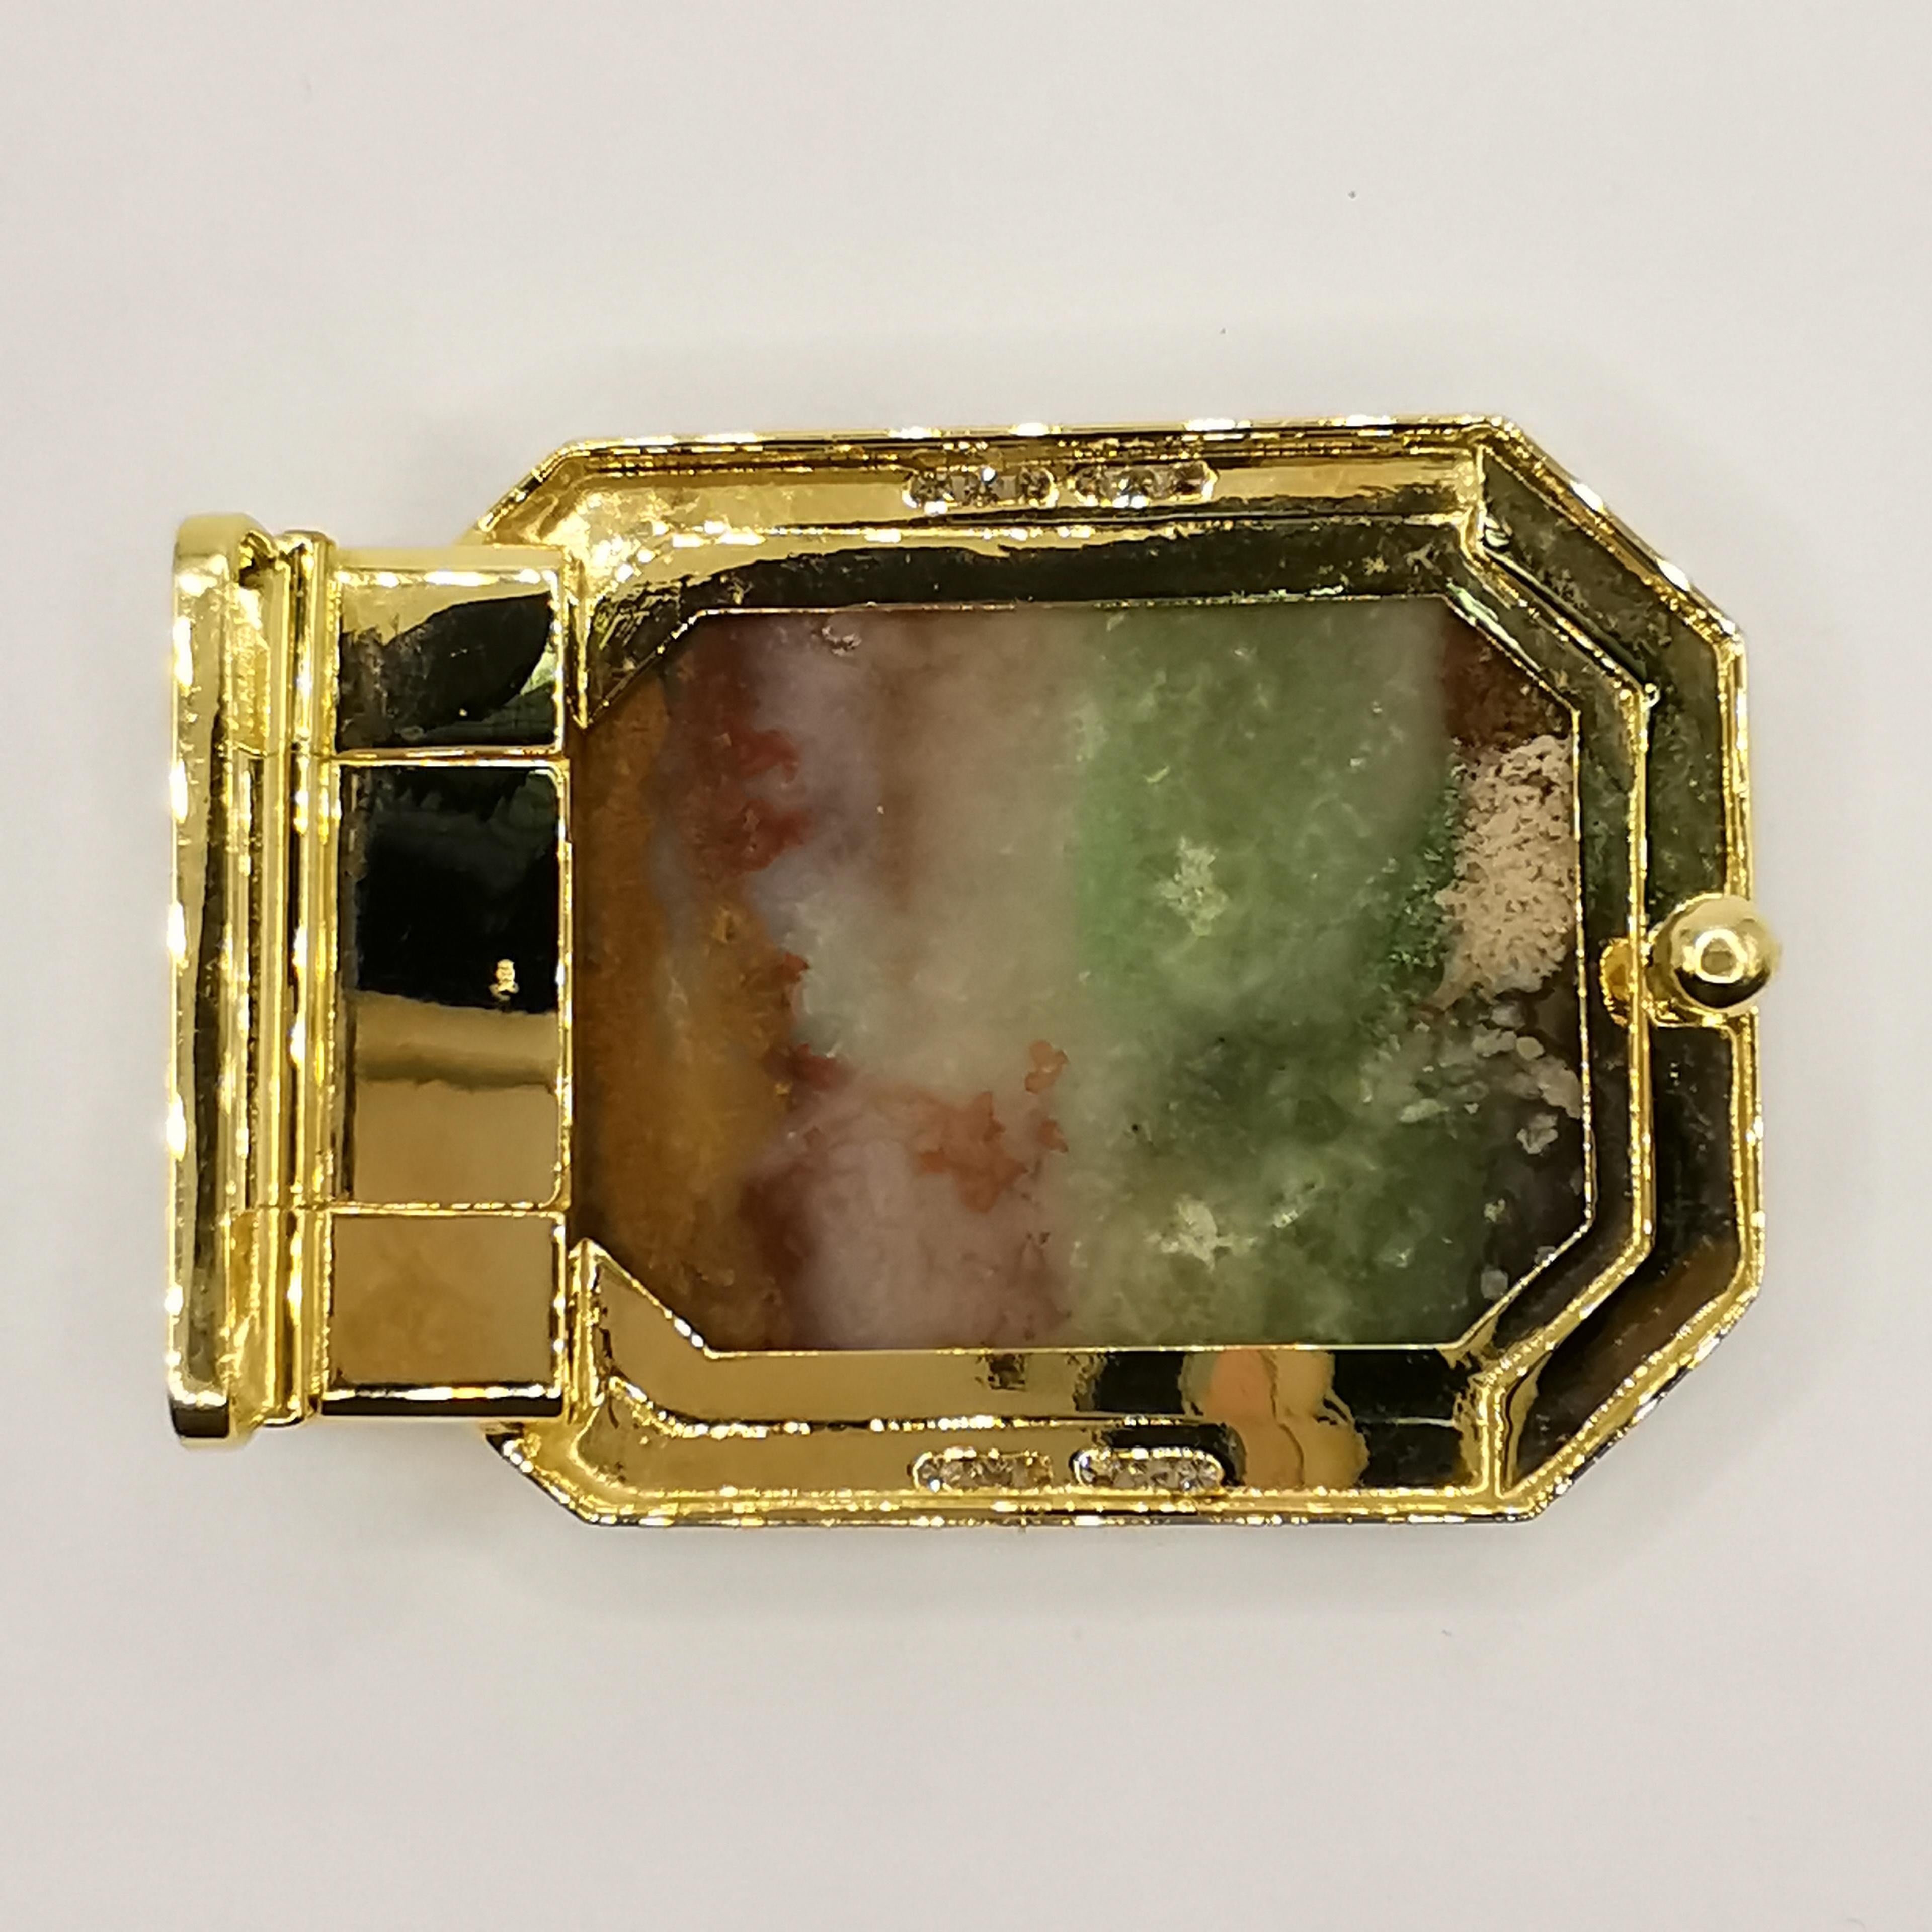 Add a touch of vintage charm to your wardrobe with this stunning Vintage Rainbow Agate Diamond 3cm Belt Buckle in 18K Yellow Gold. The centerpiece of this buckle features a beautiful agate stone with a unique pattern that resembles a rainbow, in